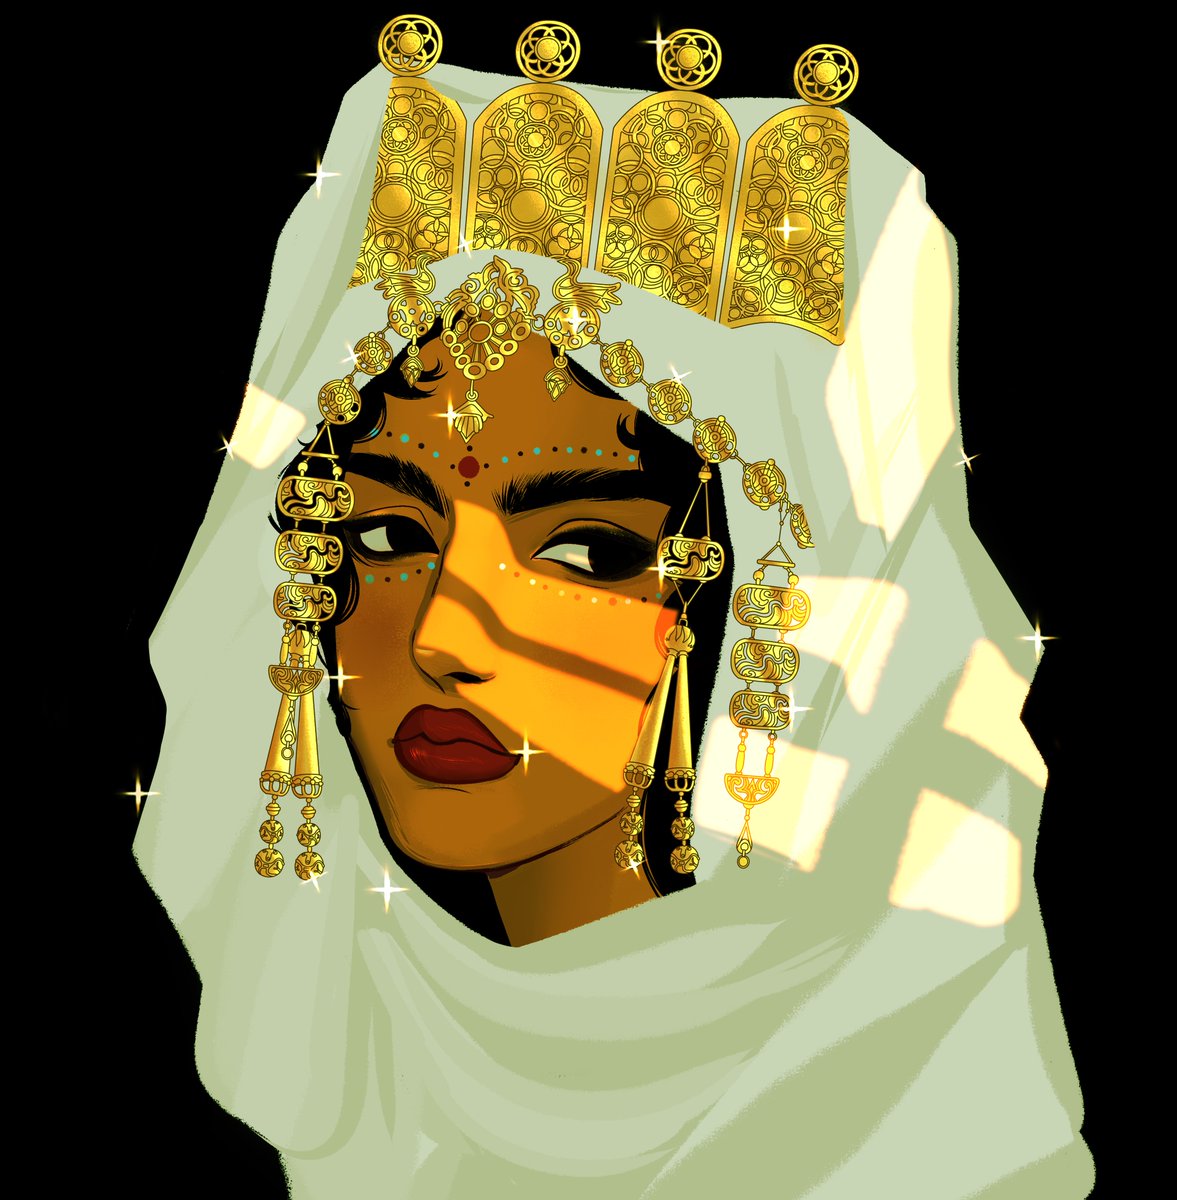 I love drawing North-African jewelry and I'm constantly in awe with our artisans' work! On the left, the head gear is loosely inspired by the Tlemcen chedda hat and on the right, Fes brides' jewelry #Artmazigh